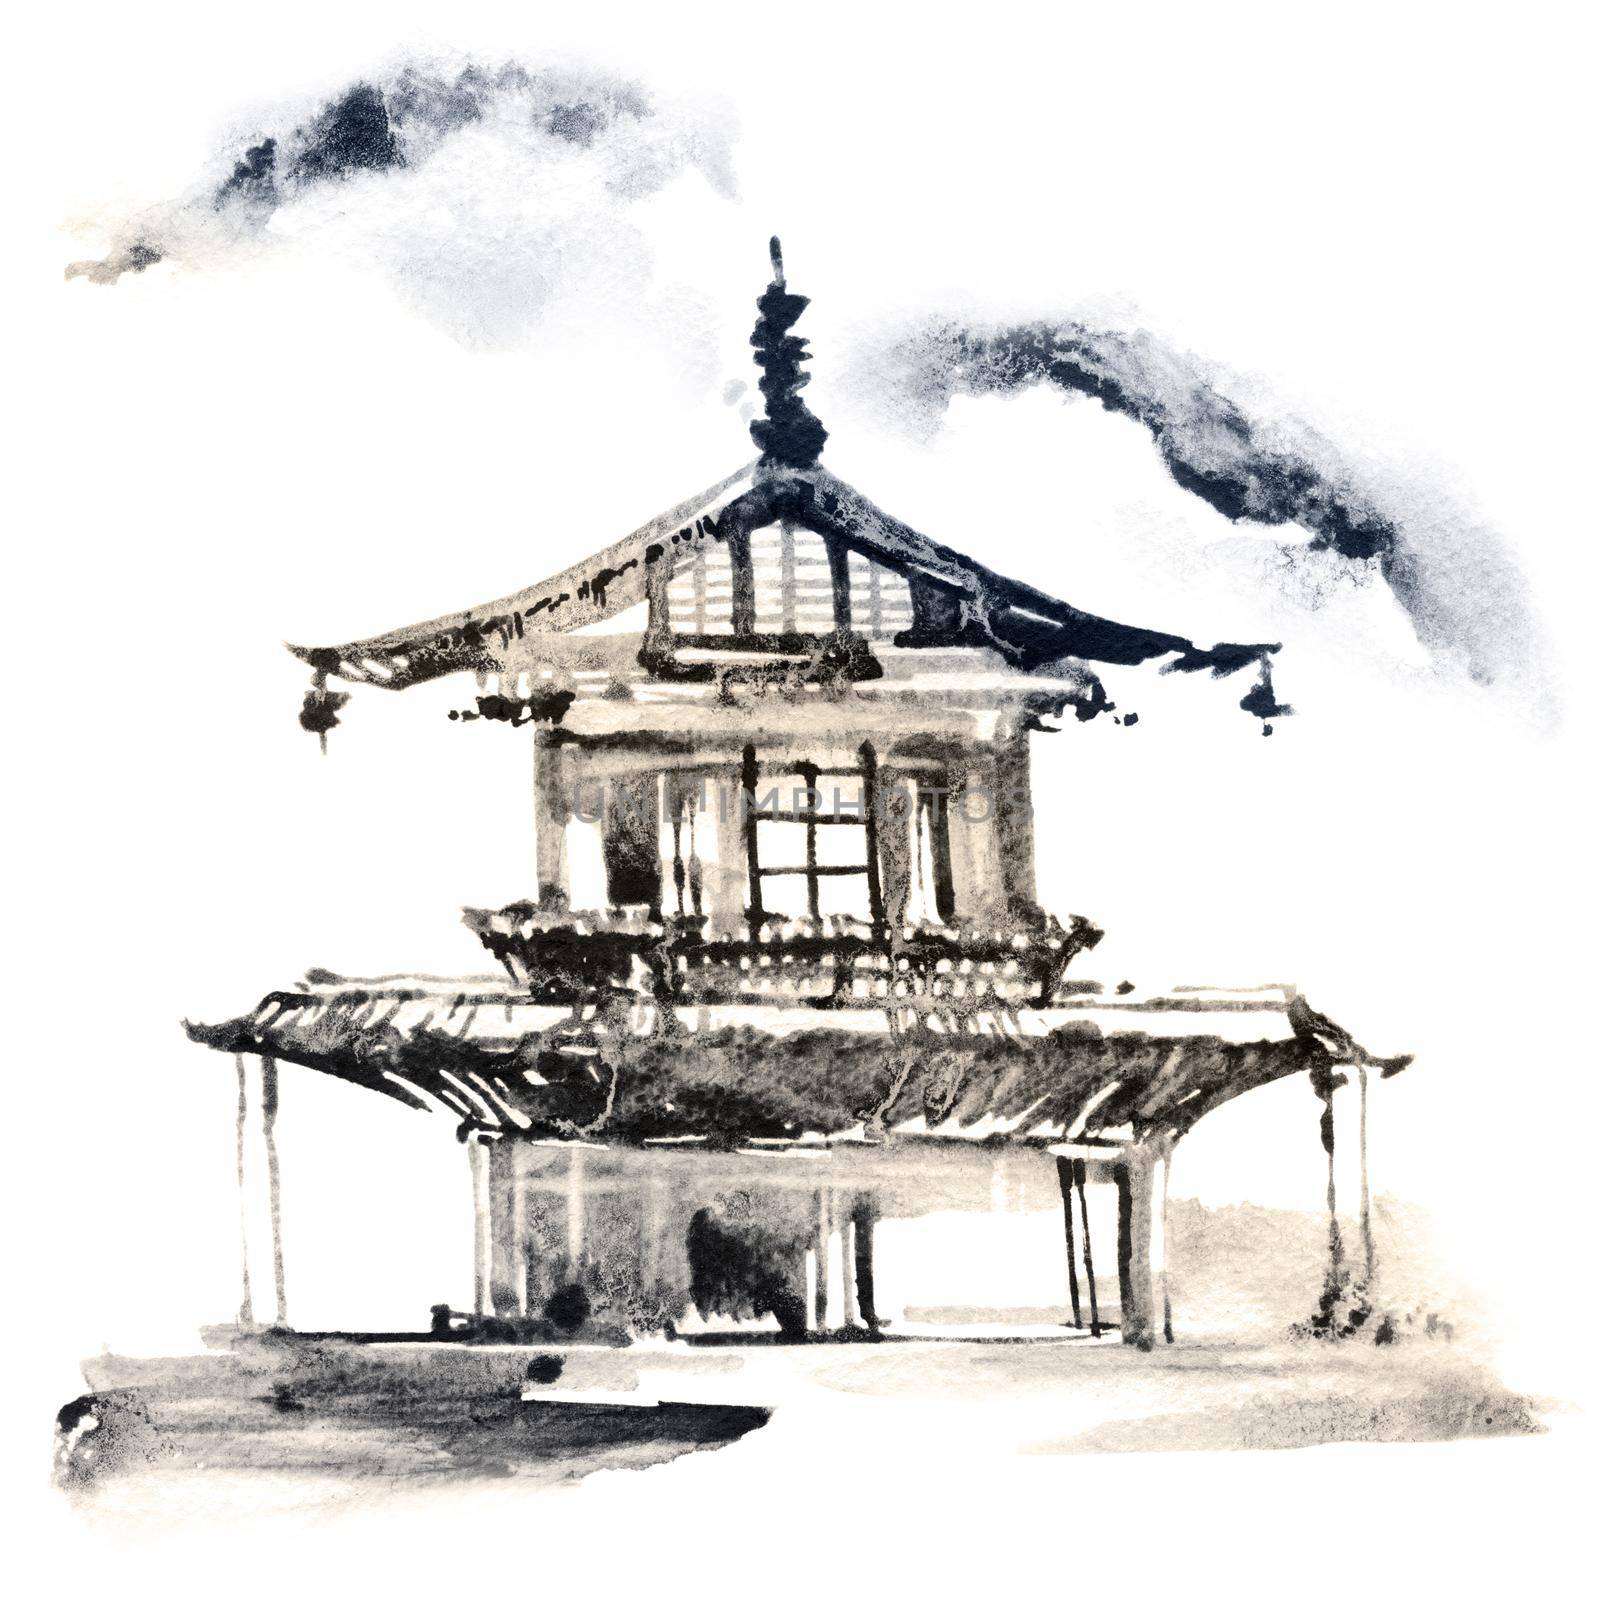 Watercolor and ink sketch - illustration of pagoda building with clouds, oriental traditional sumi-e painting